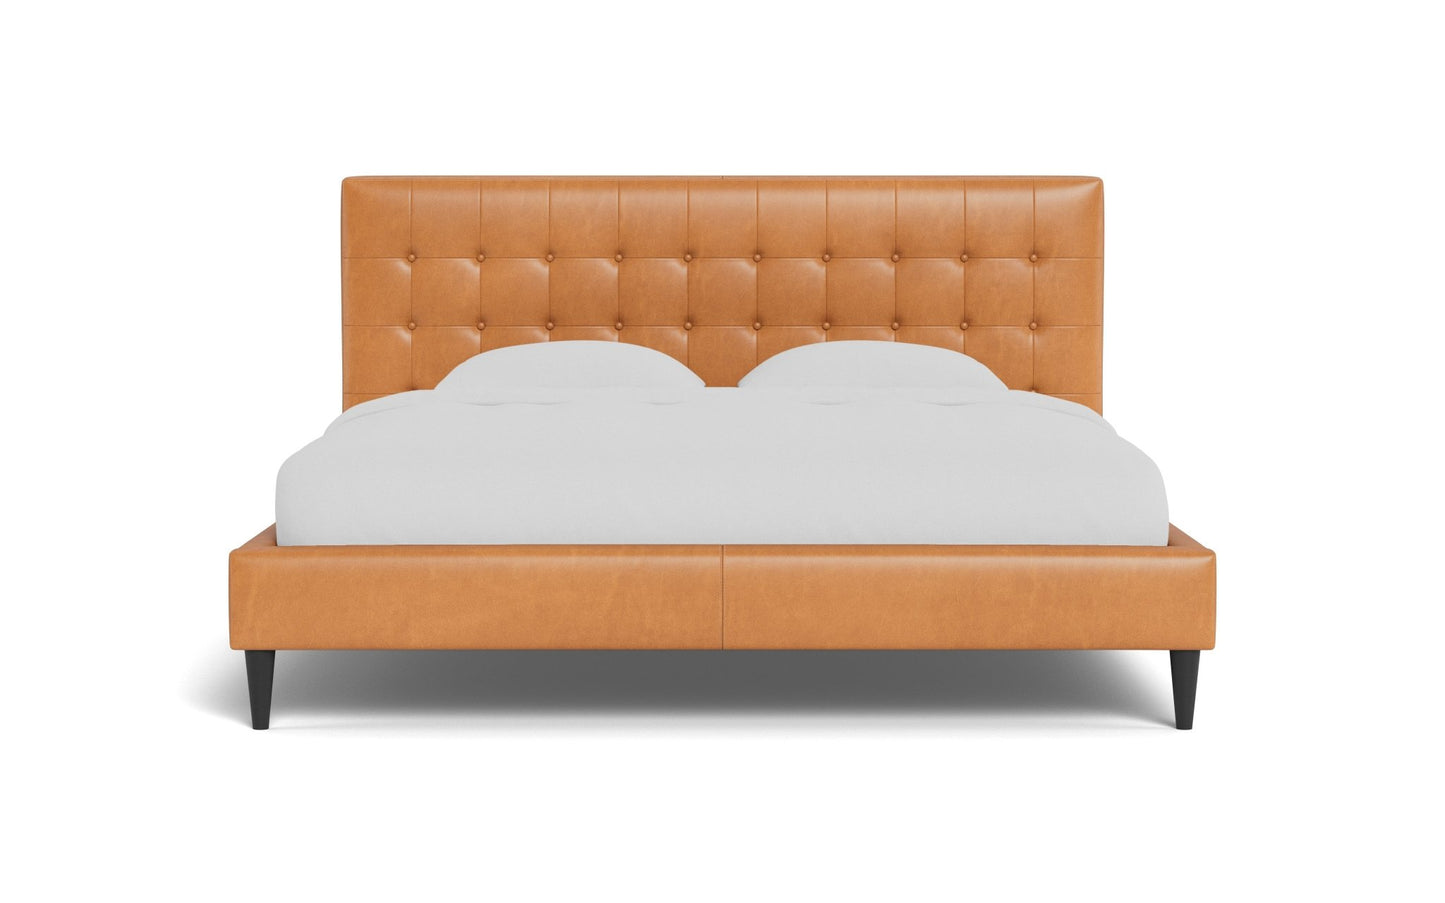 Wallace King Tufted Leather Bed